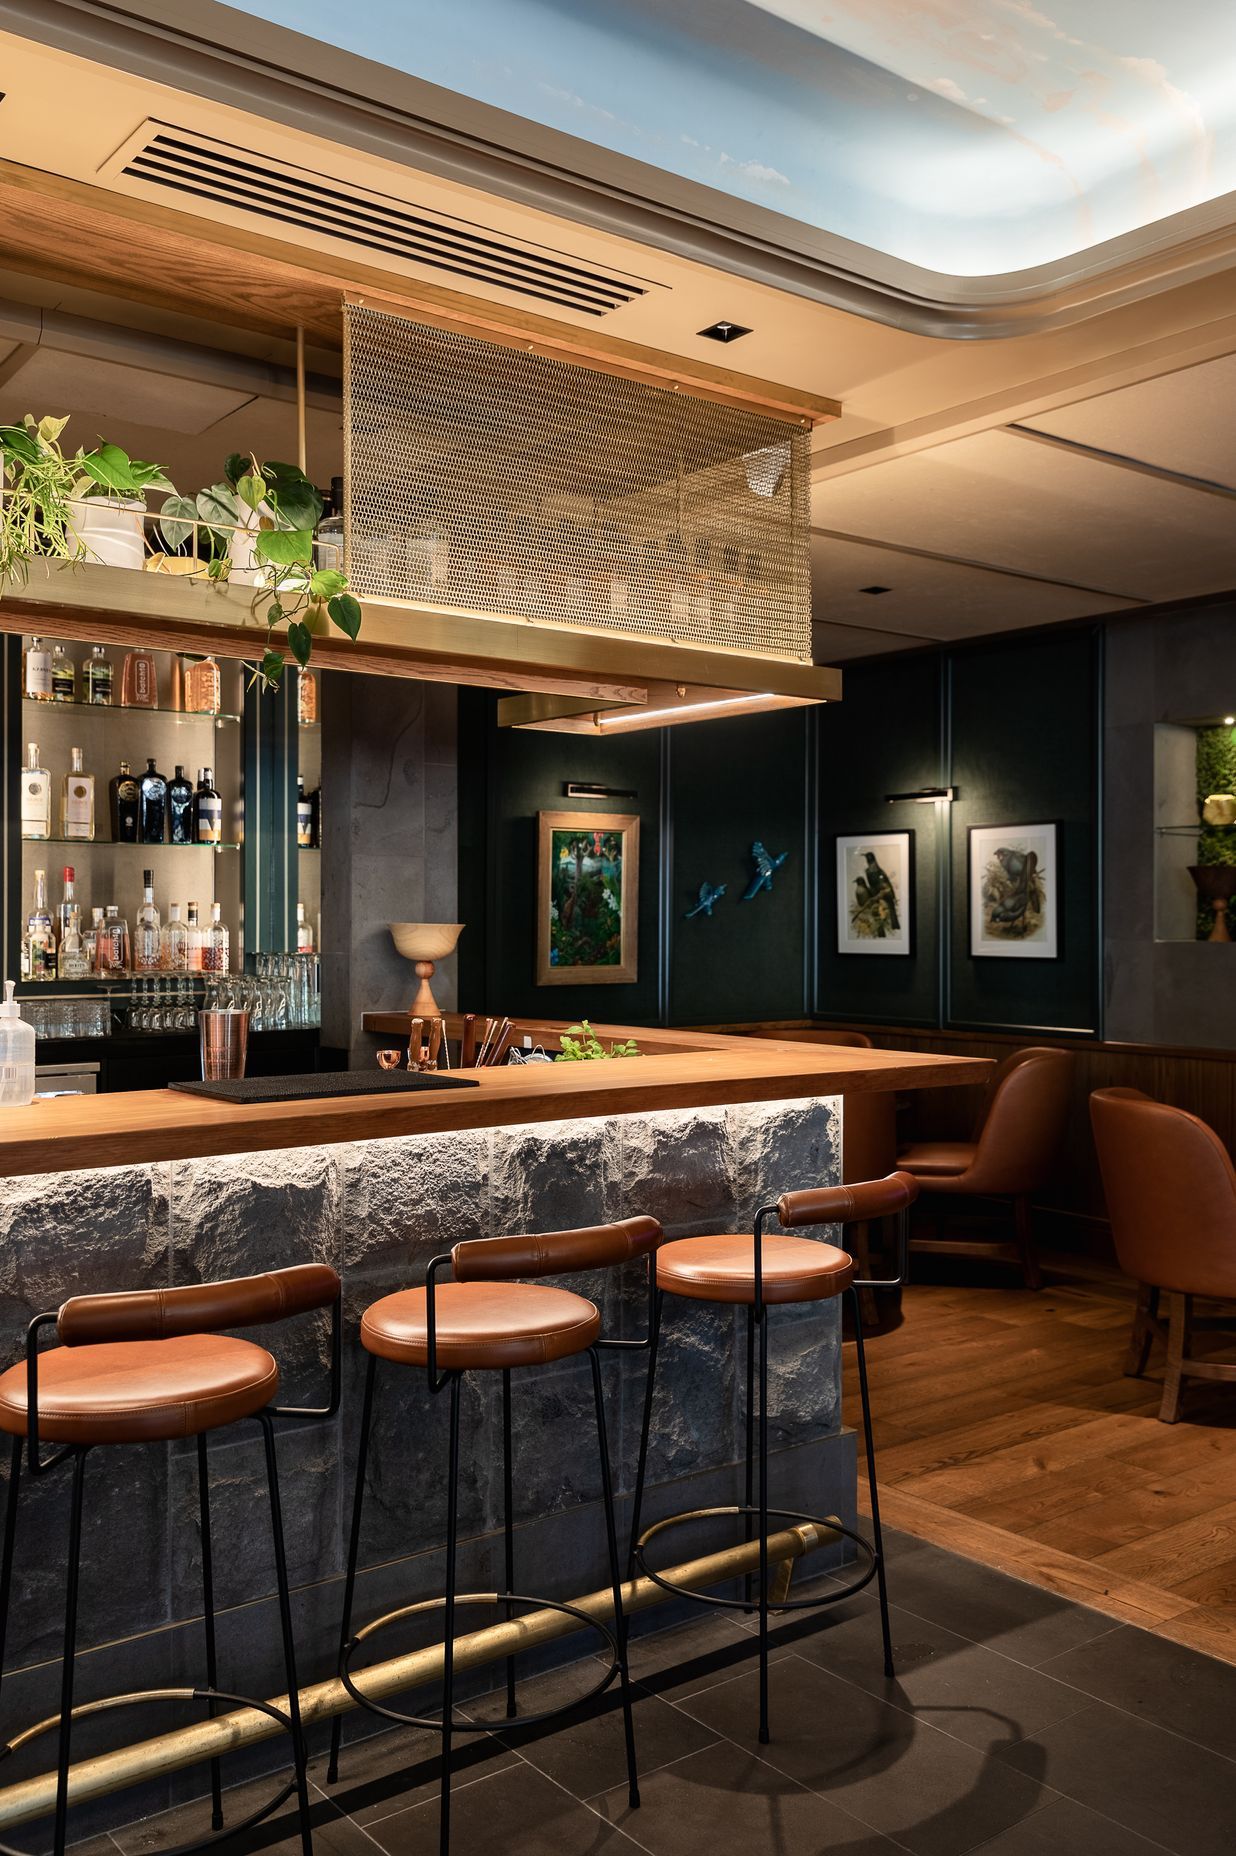 The hotel bar was fitted out in keeping with the textural and biophilic qualities of the rooms.